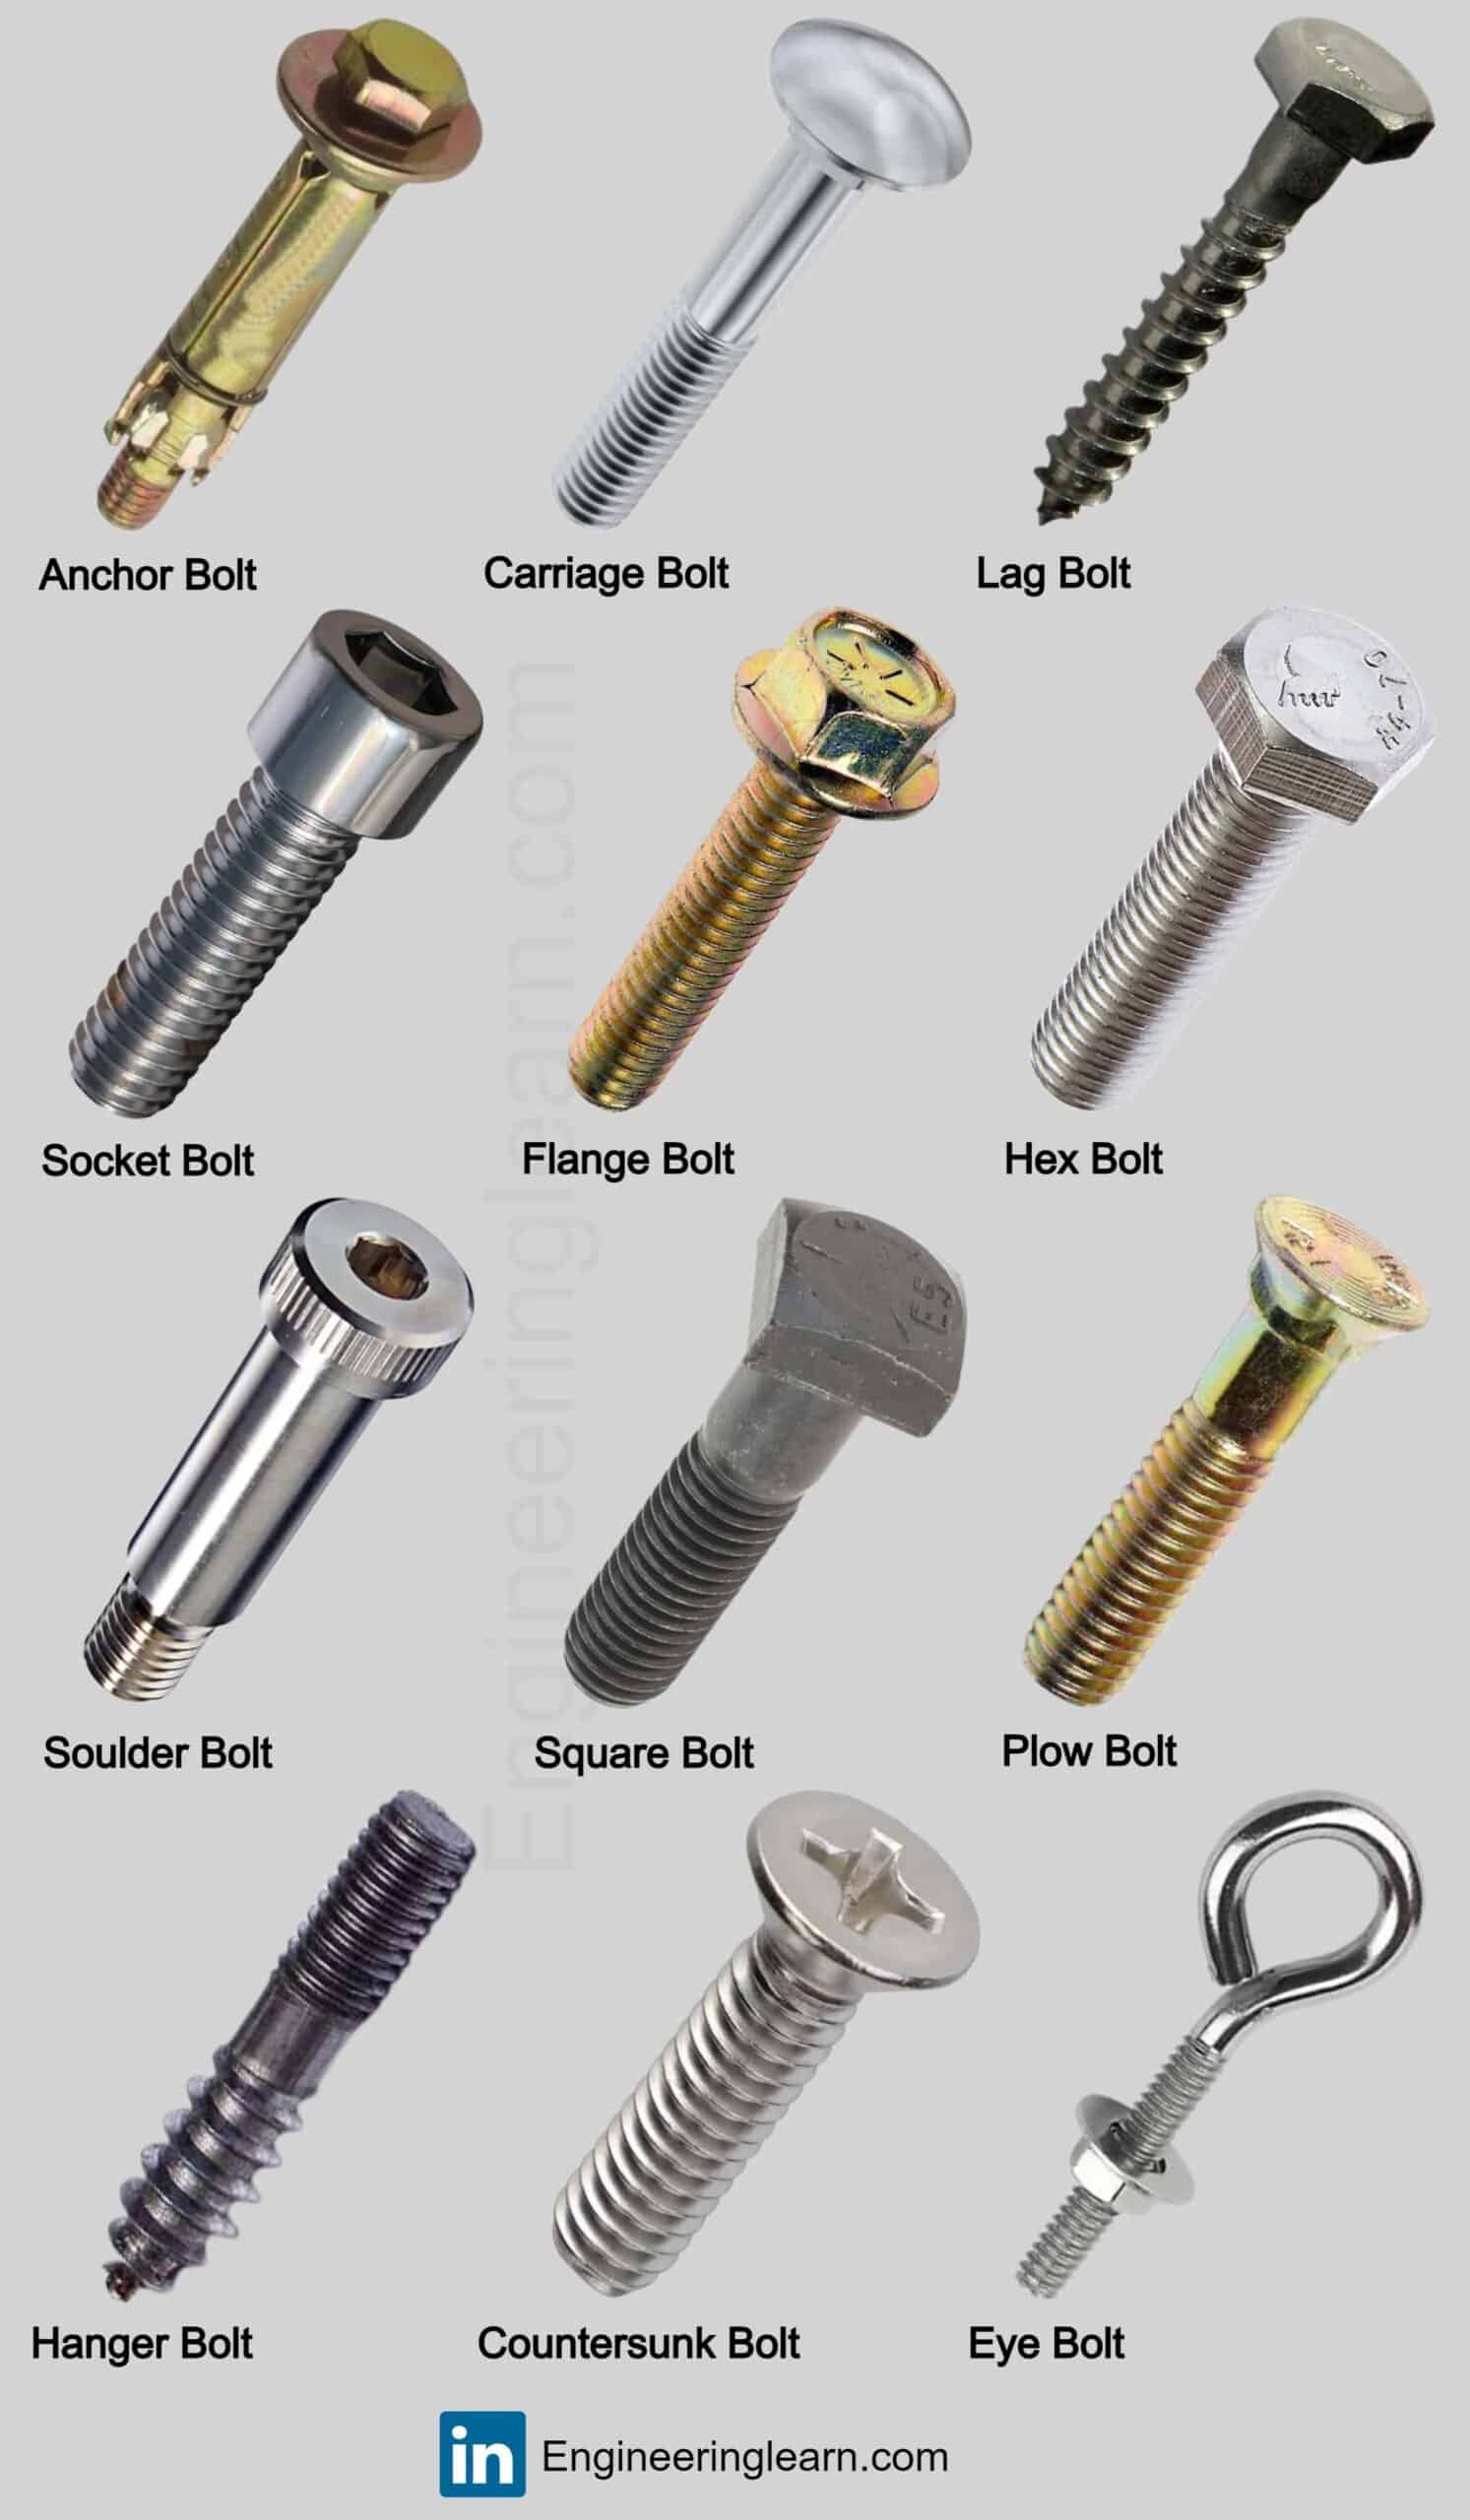 https://engineeringlearn.com/wp-content/uploads/2020/12/Types-of-Bolts-scaled.jpg